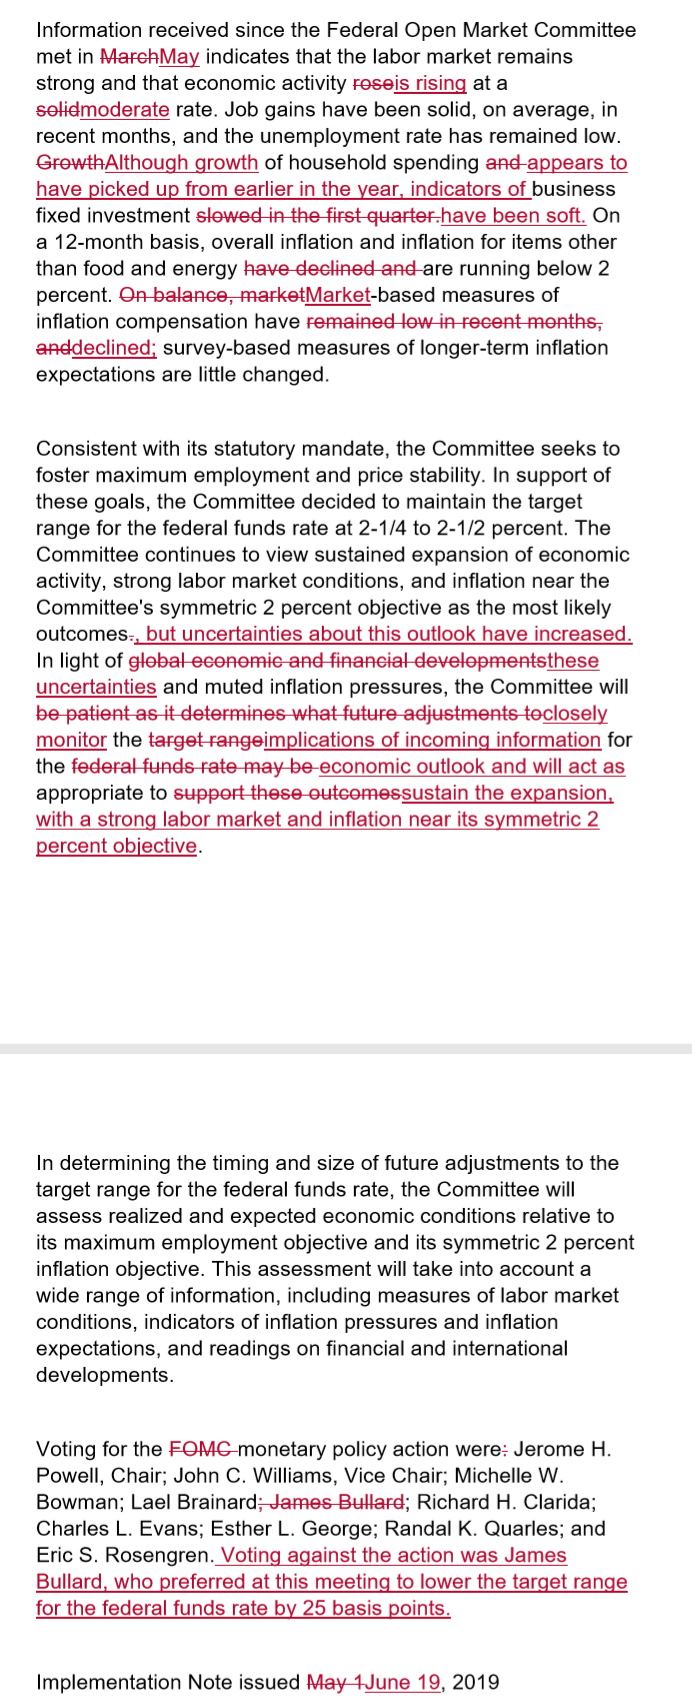 The Federal Reserve statement released June 19, 2019: